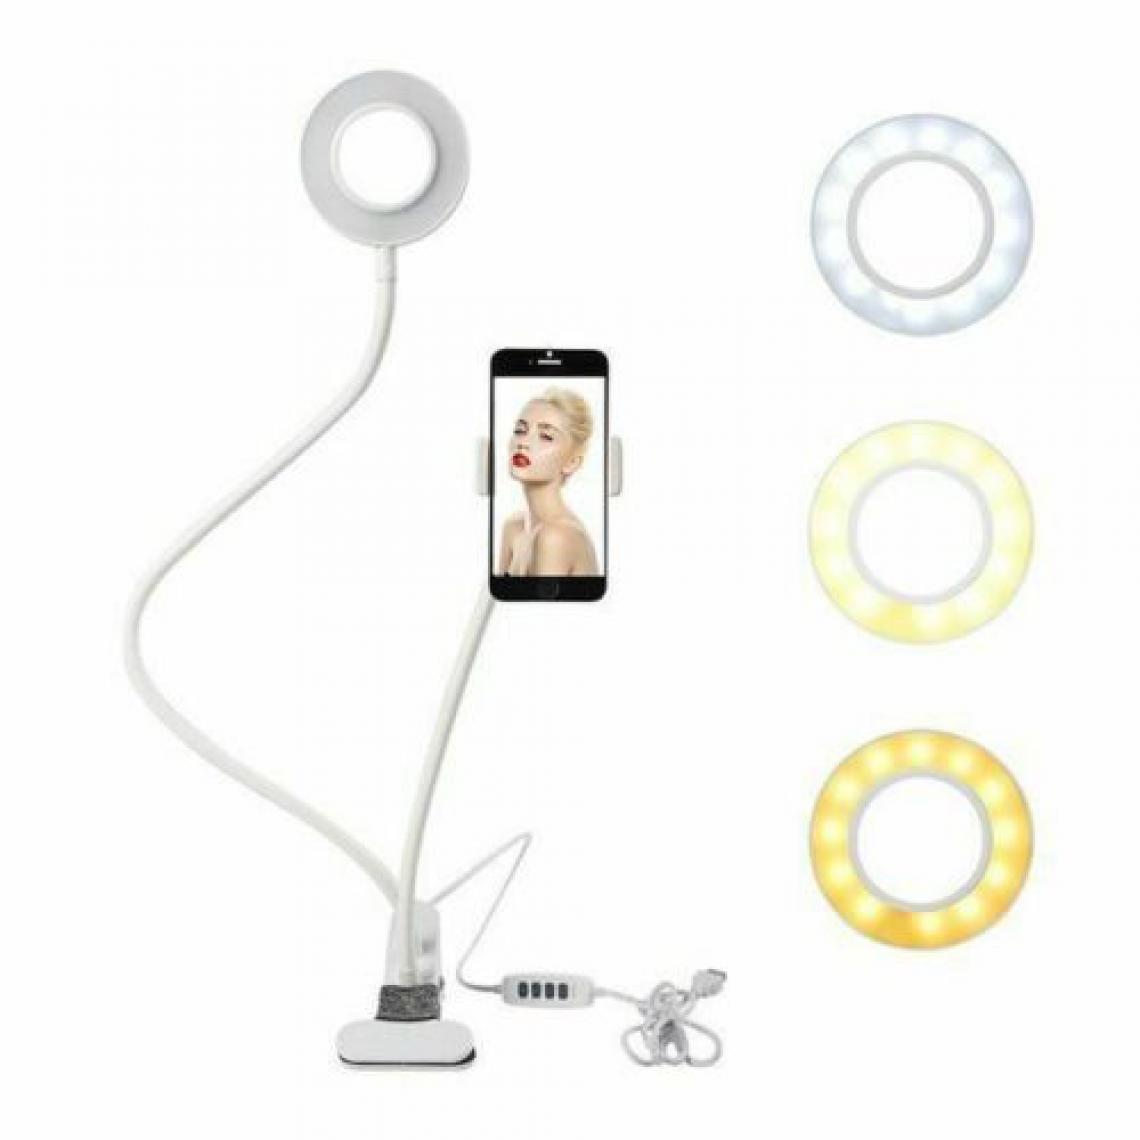 Ozzzo - Stand support bureau selfie led ozzzo blanc pour ONE PLUS ONEPLUS X - Station d'accueil smartphone